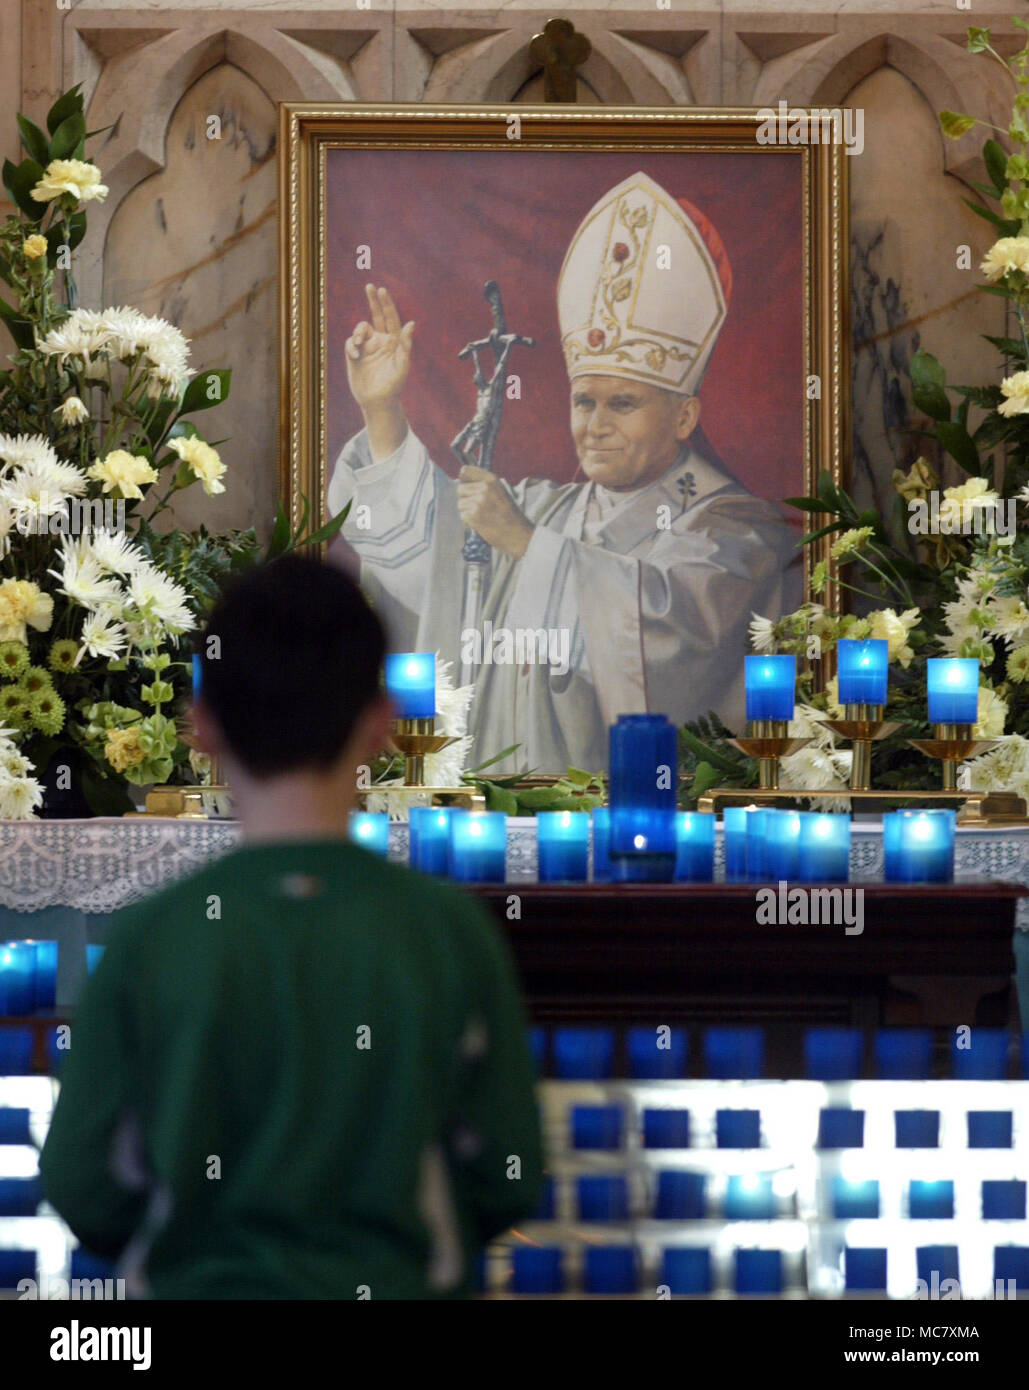 BELFAST, NORTHERN IRELAND - APRIL 2: A shrine with a painting of Pope John Paul II is seen at St. Paul's Chapel on the Falls Road April 1, 2005 in west Belfast, Northern Ireland. The Pope had been reported to be in a 'very grave' condition Stock Photo